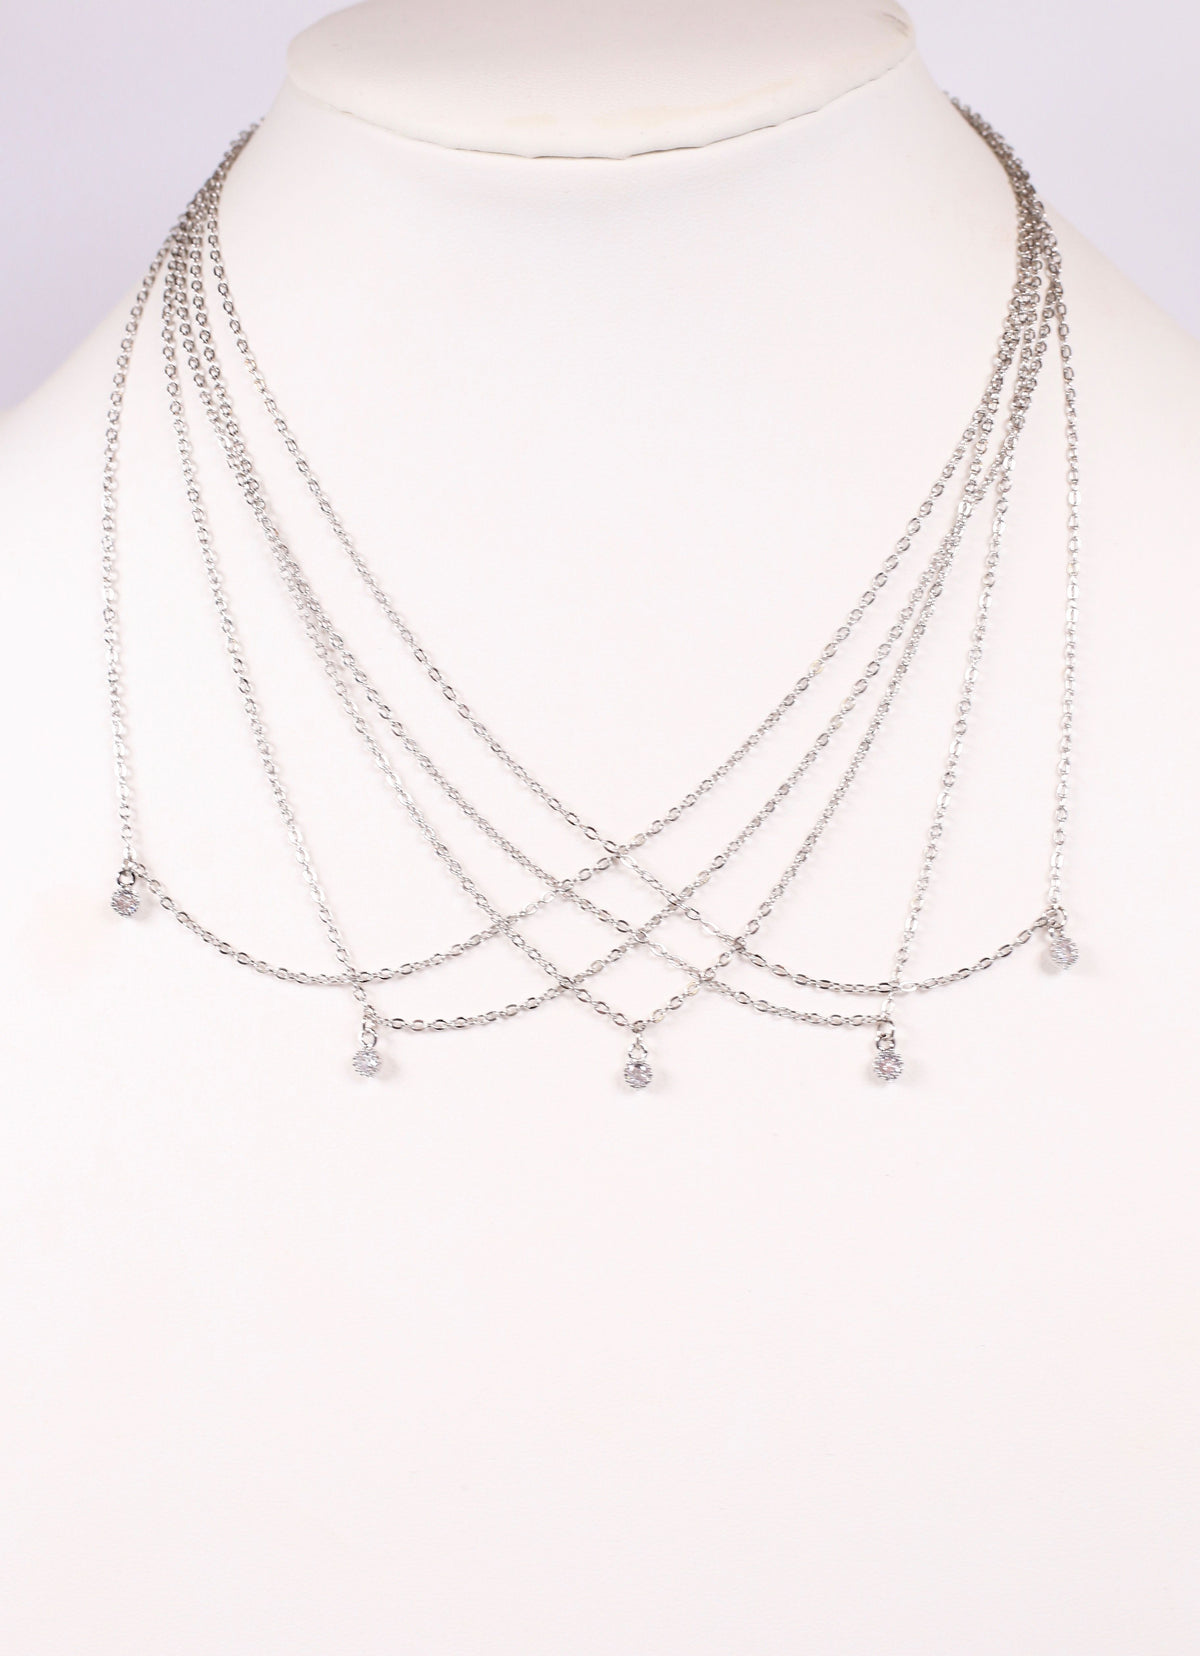 Rowley Layered CZ Necklace SILVER